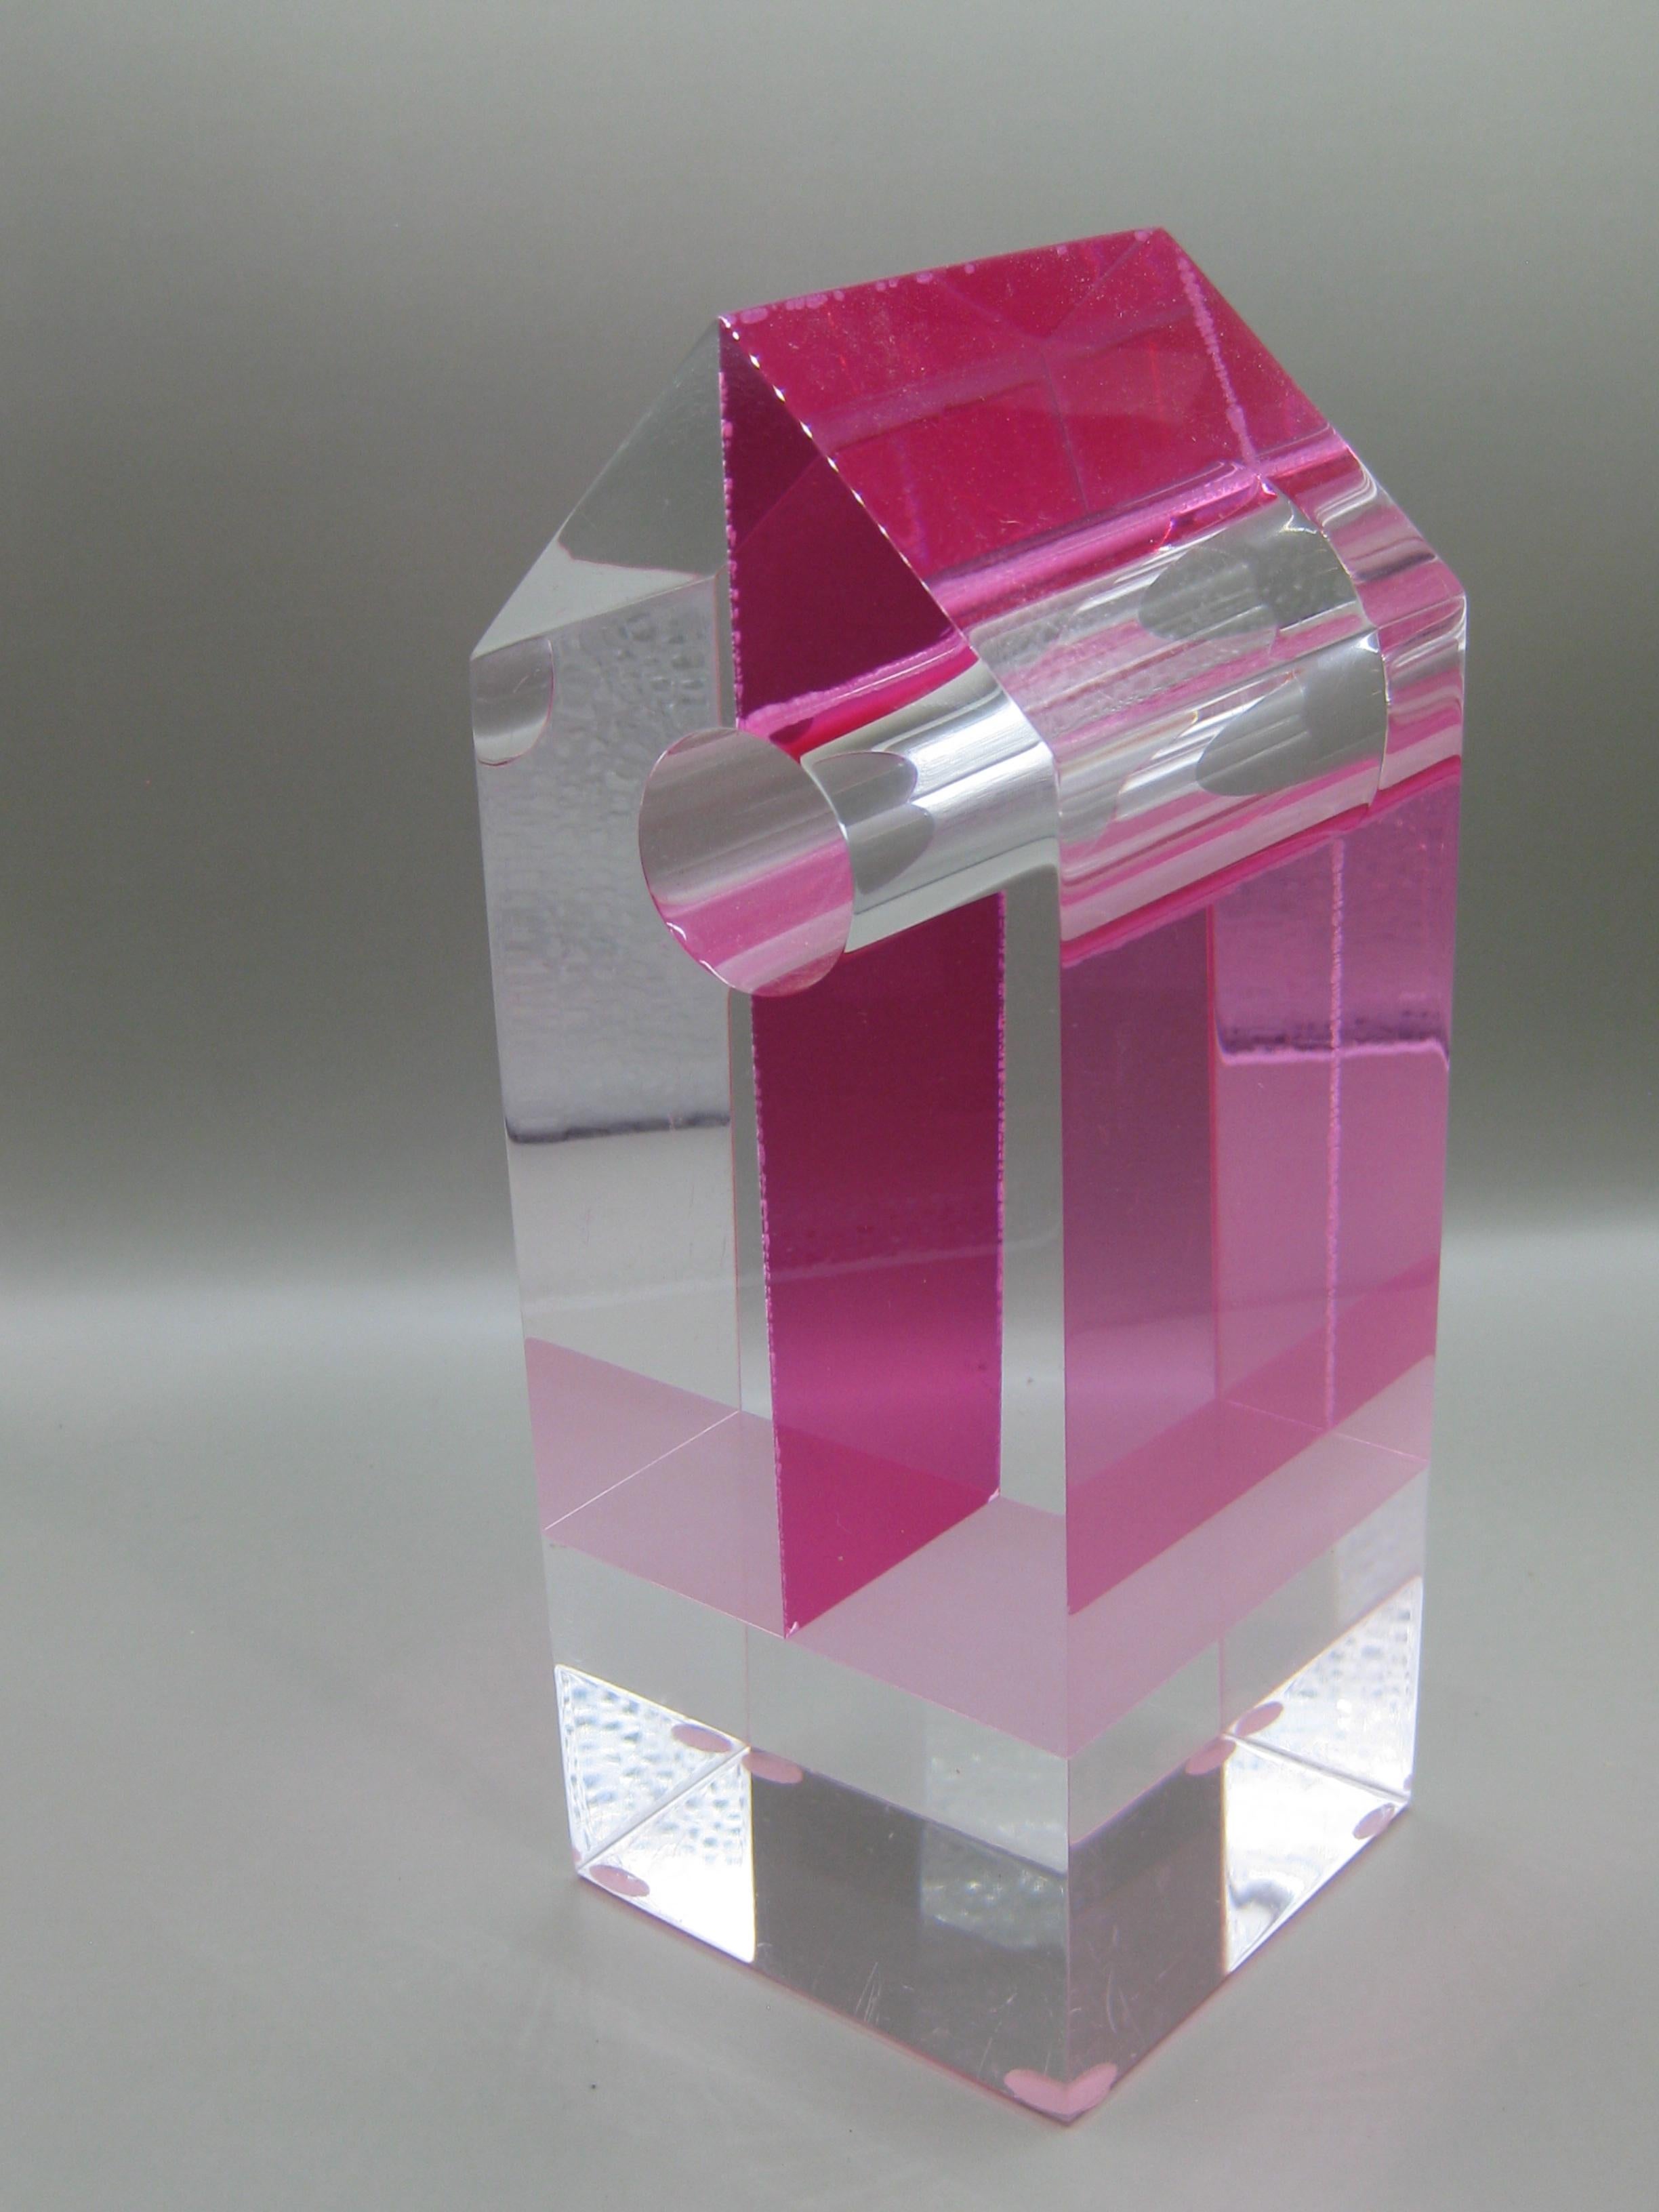 1960's-1970's Lucite Acrylic Optical Op Art Abstract Sculpture For Sale 6